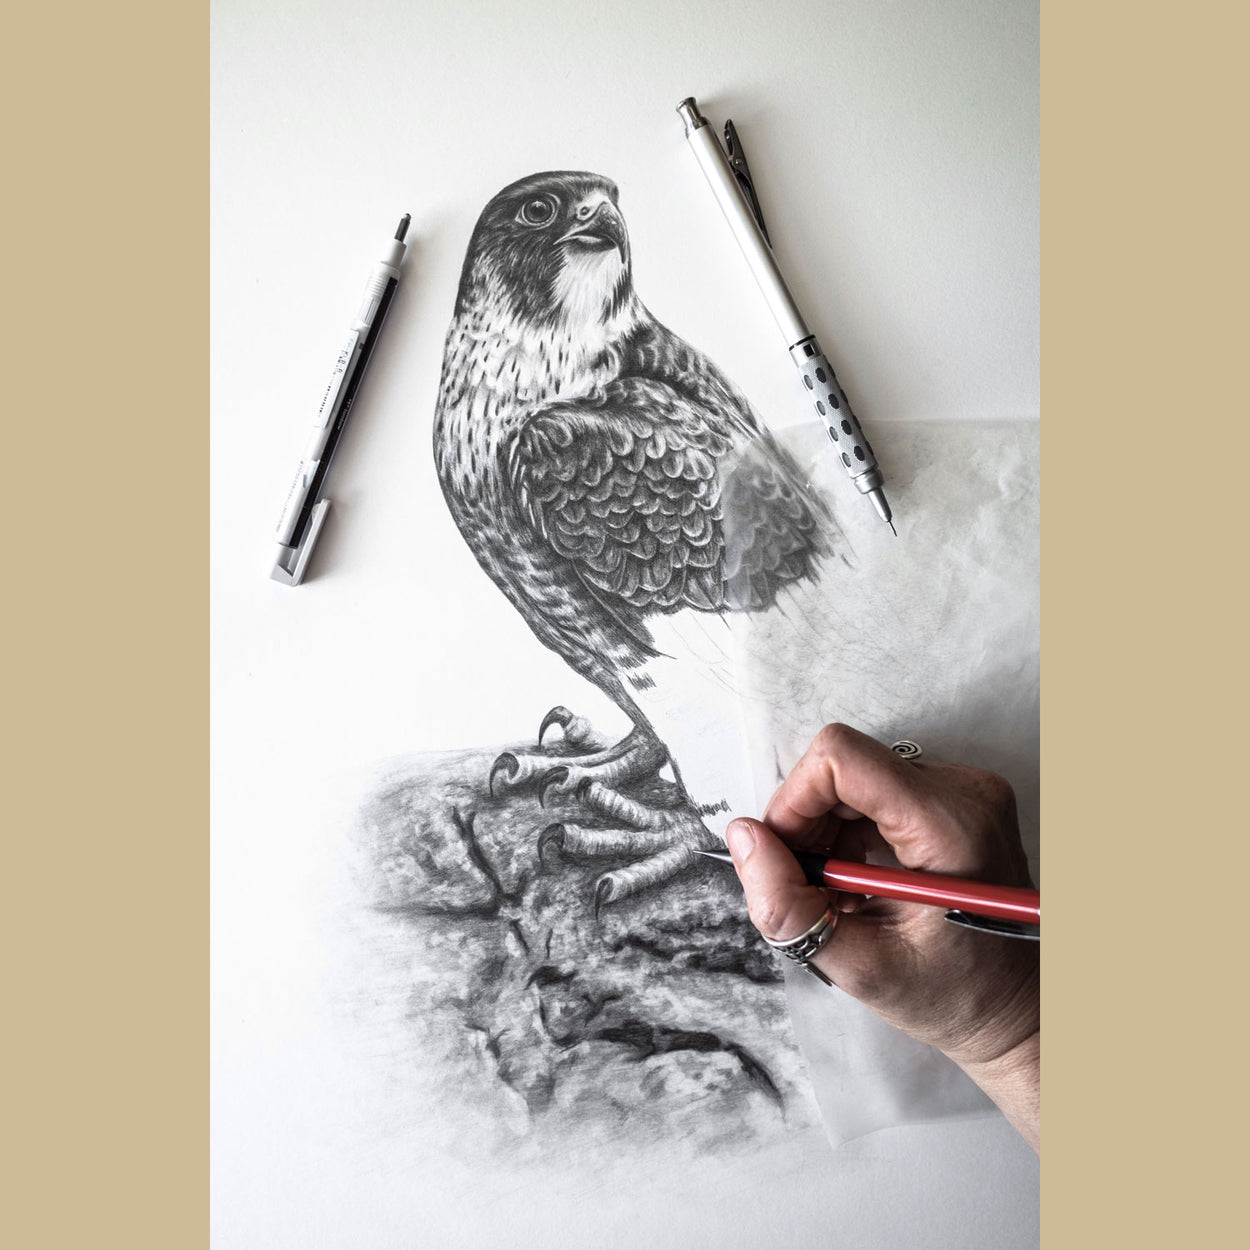 Peregrine Drawing in Progress - The Thriving Wild